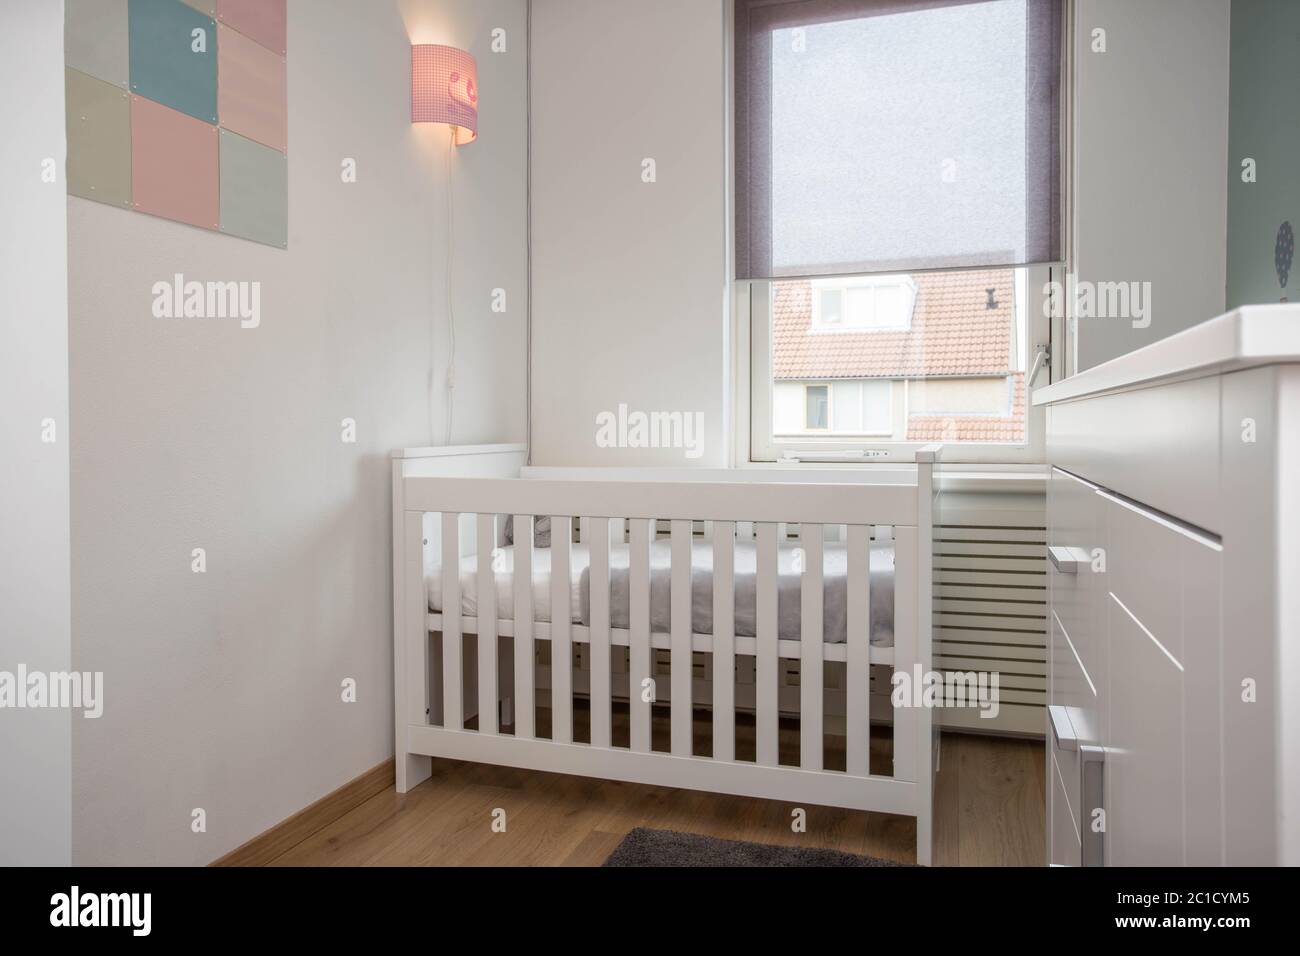 Interior of modern baby room simple white decoration Stock Photo